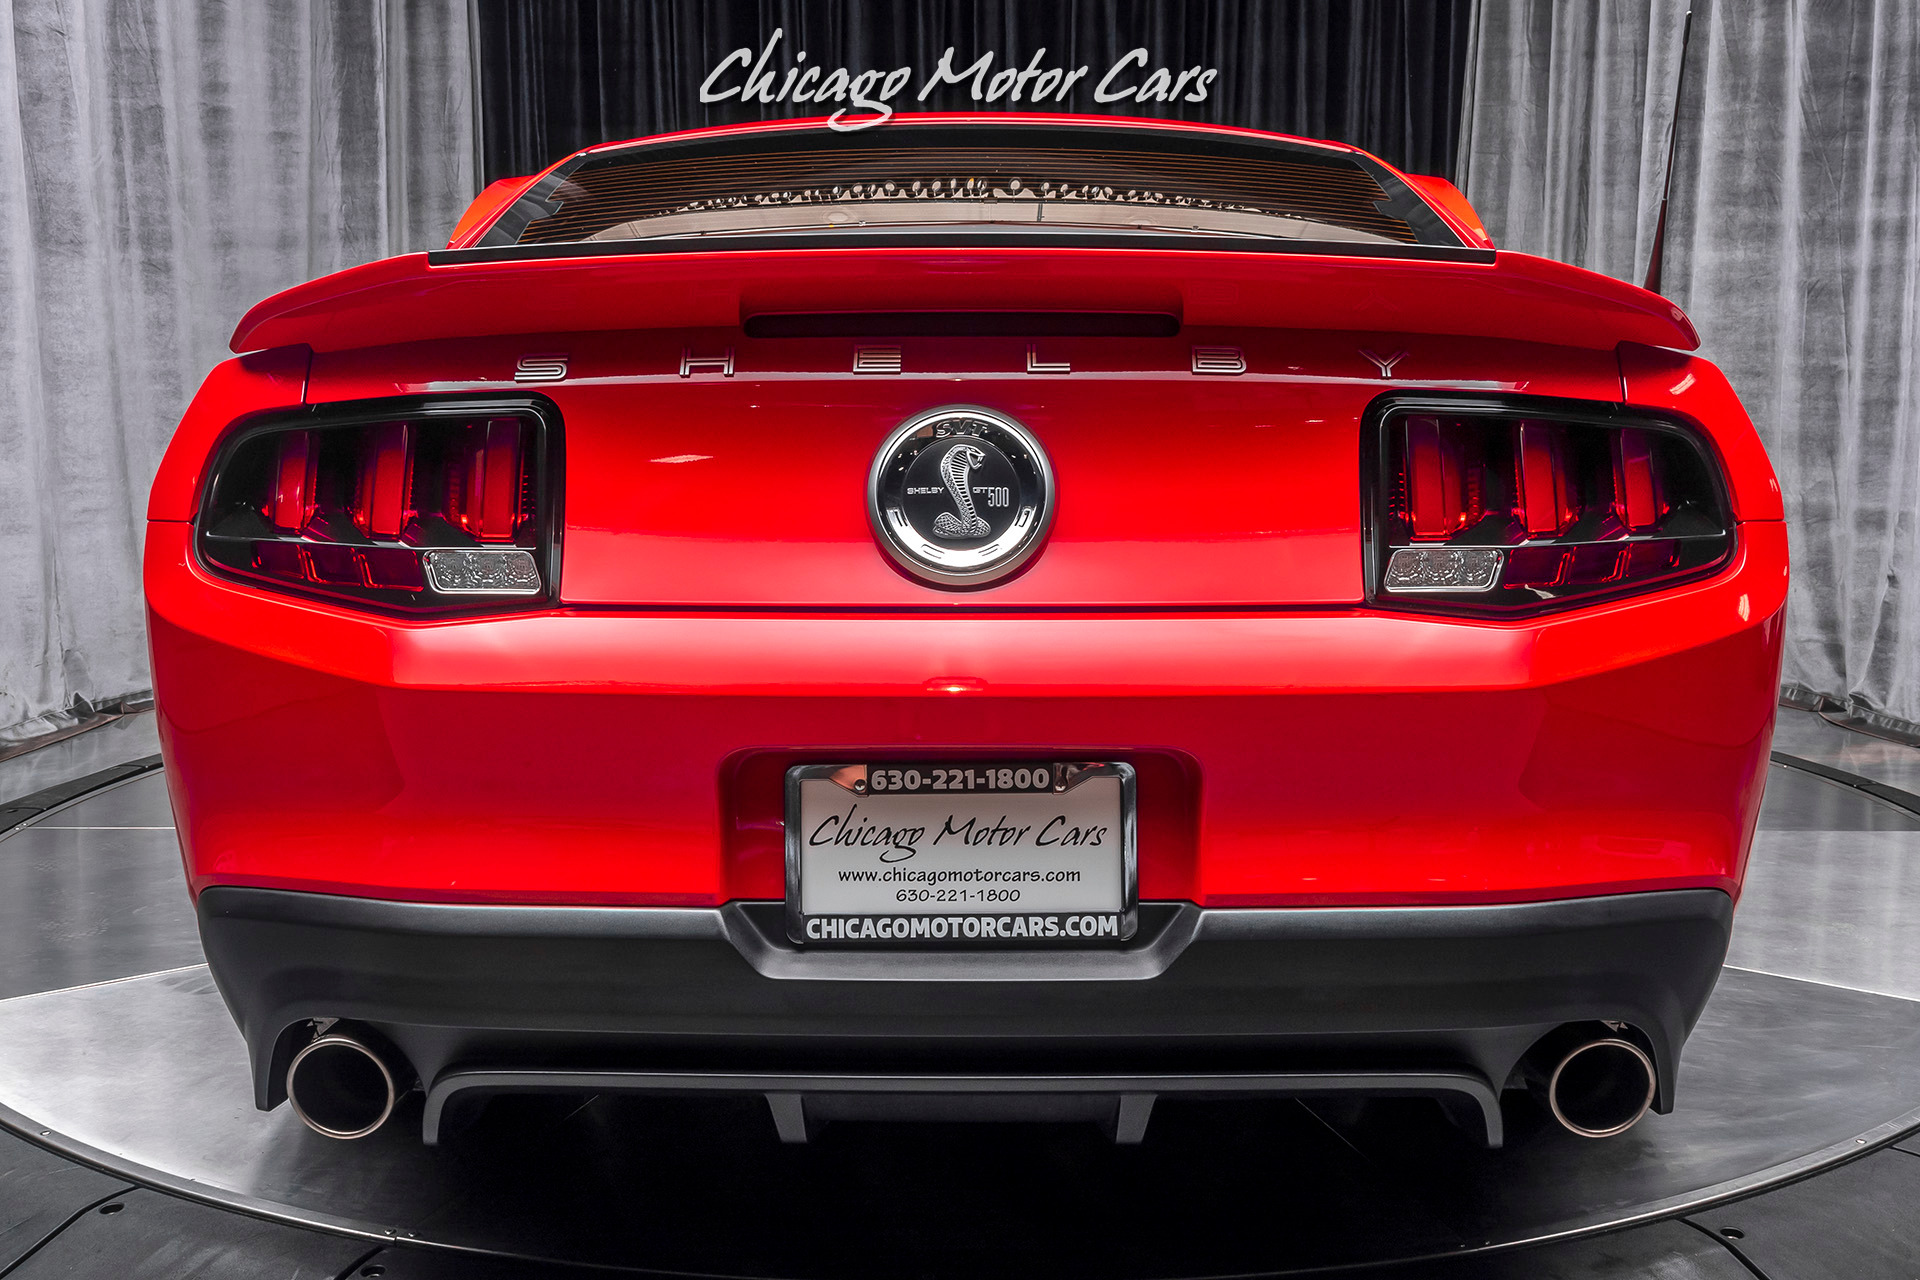 Used-2012-Ford-Mustang-Shelby-GT500-FLOWMASTER-EXHAUST-ONLY-6K-MILES